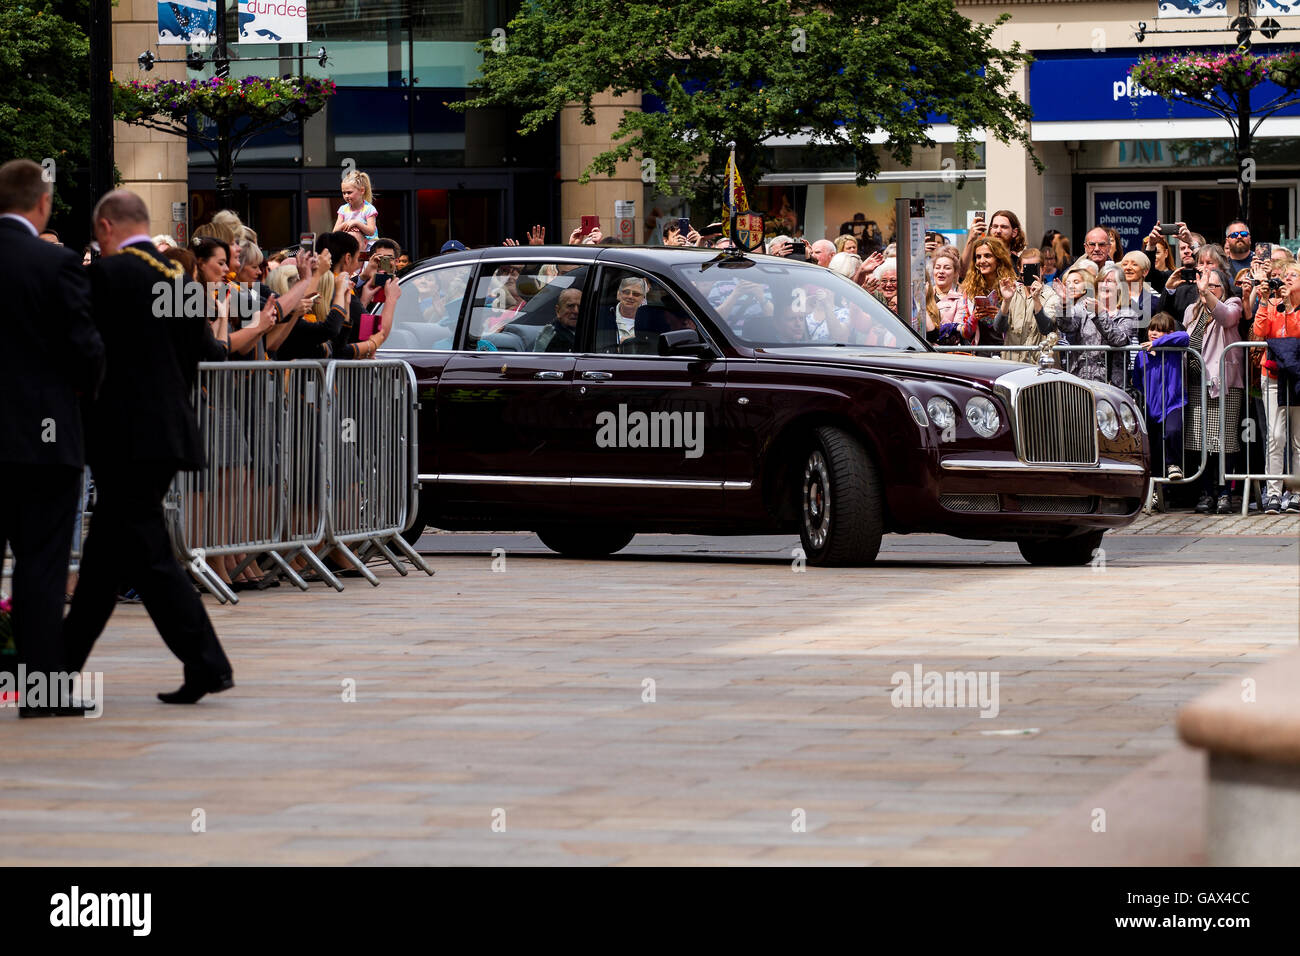 Dundee, Tayside, Scotland, UK. July 6th 2016. Her Majesty The Queen and His Royal Highness Prince Philip arriving at the Chambers of Commerce in the City Square today during their Royal visit to Dundee. Credit: Dundee Photographics / Alamy Live News Stock Photo